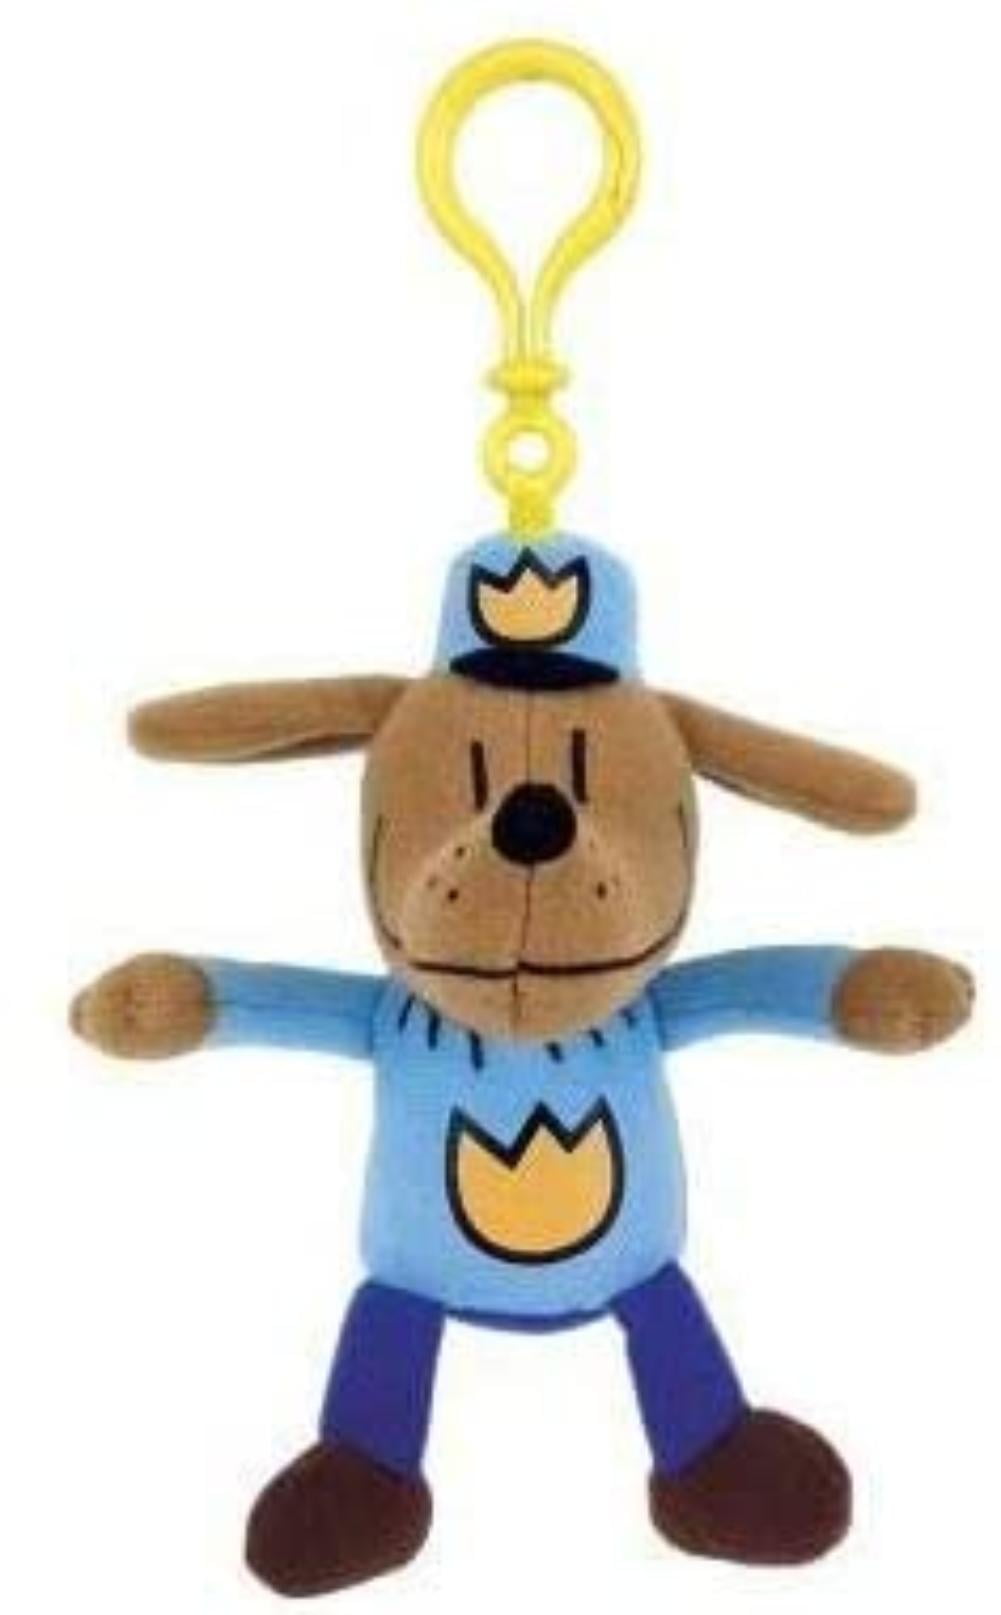 MerryMakers Dog Man's Petey Plush Toy 9-Inch 